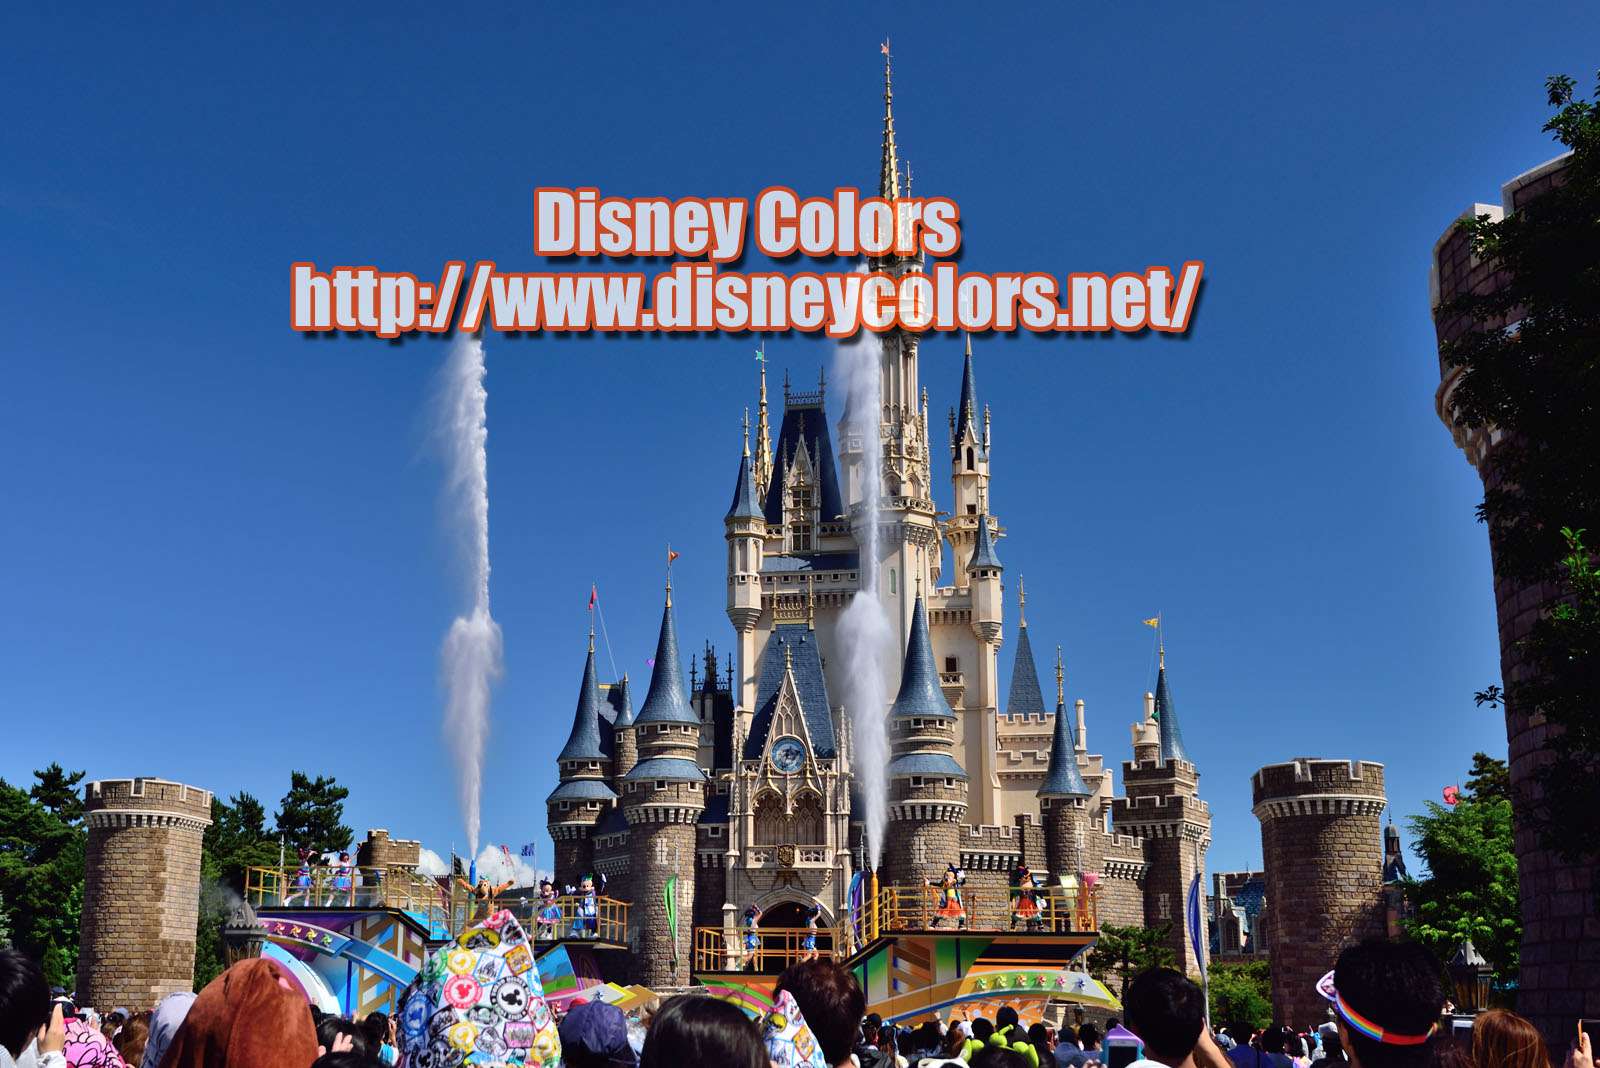 Tdl 燦水 サマービート17 フロート停止位置 鑑賞ガイド Disney Colors Event Guide